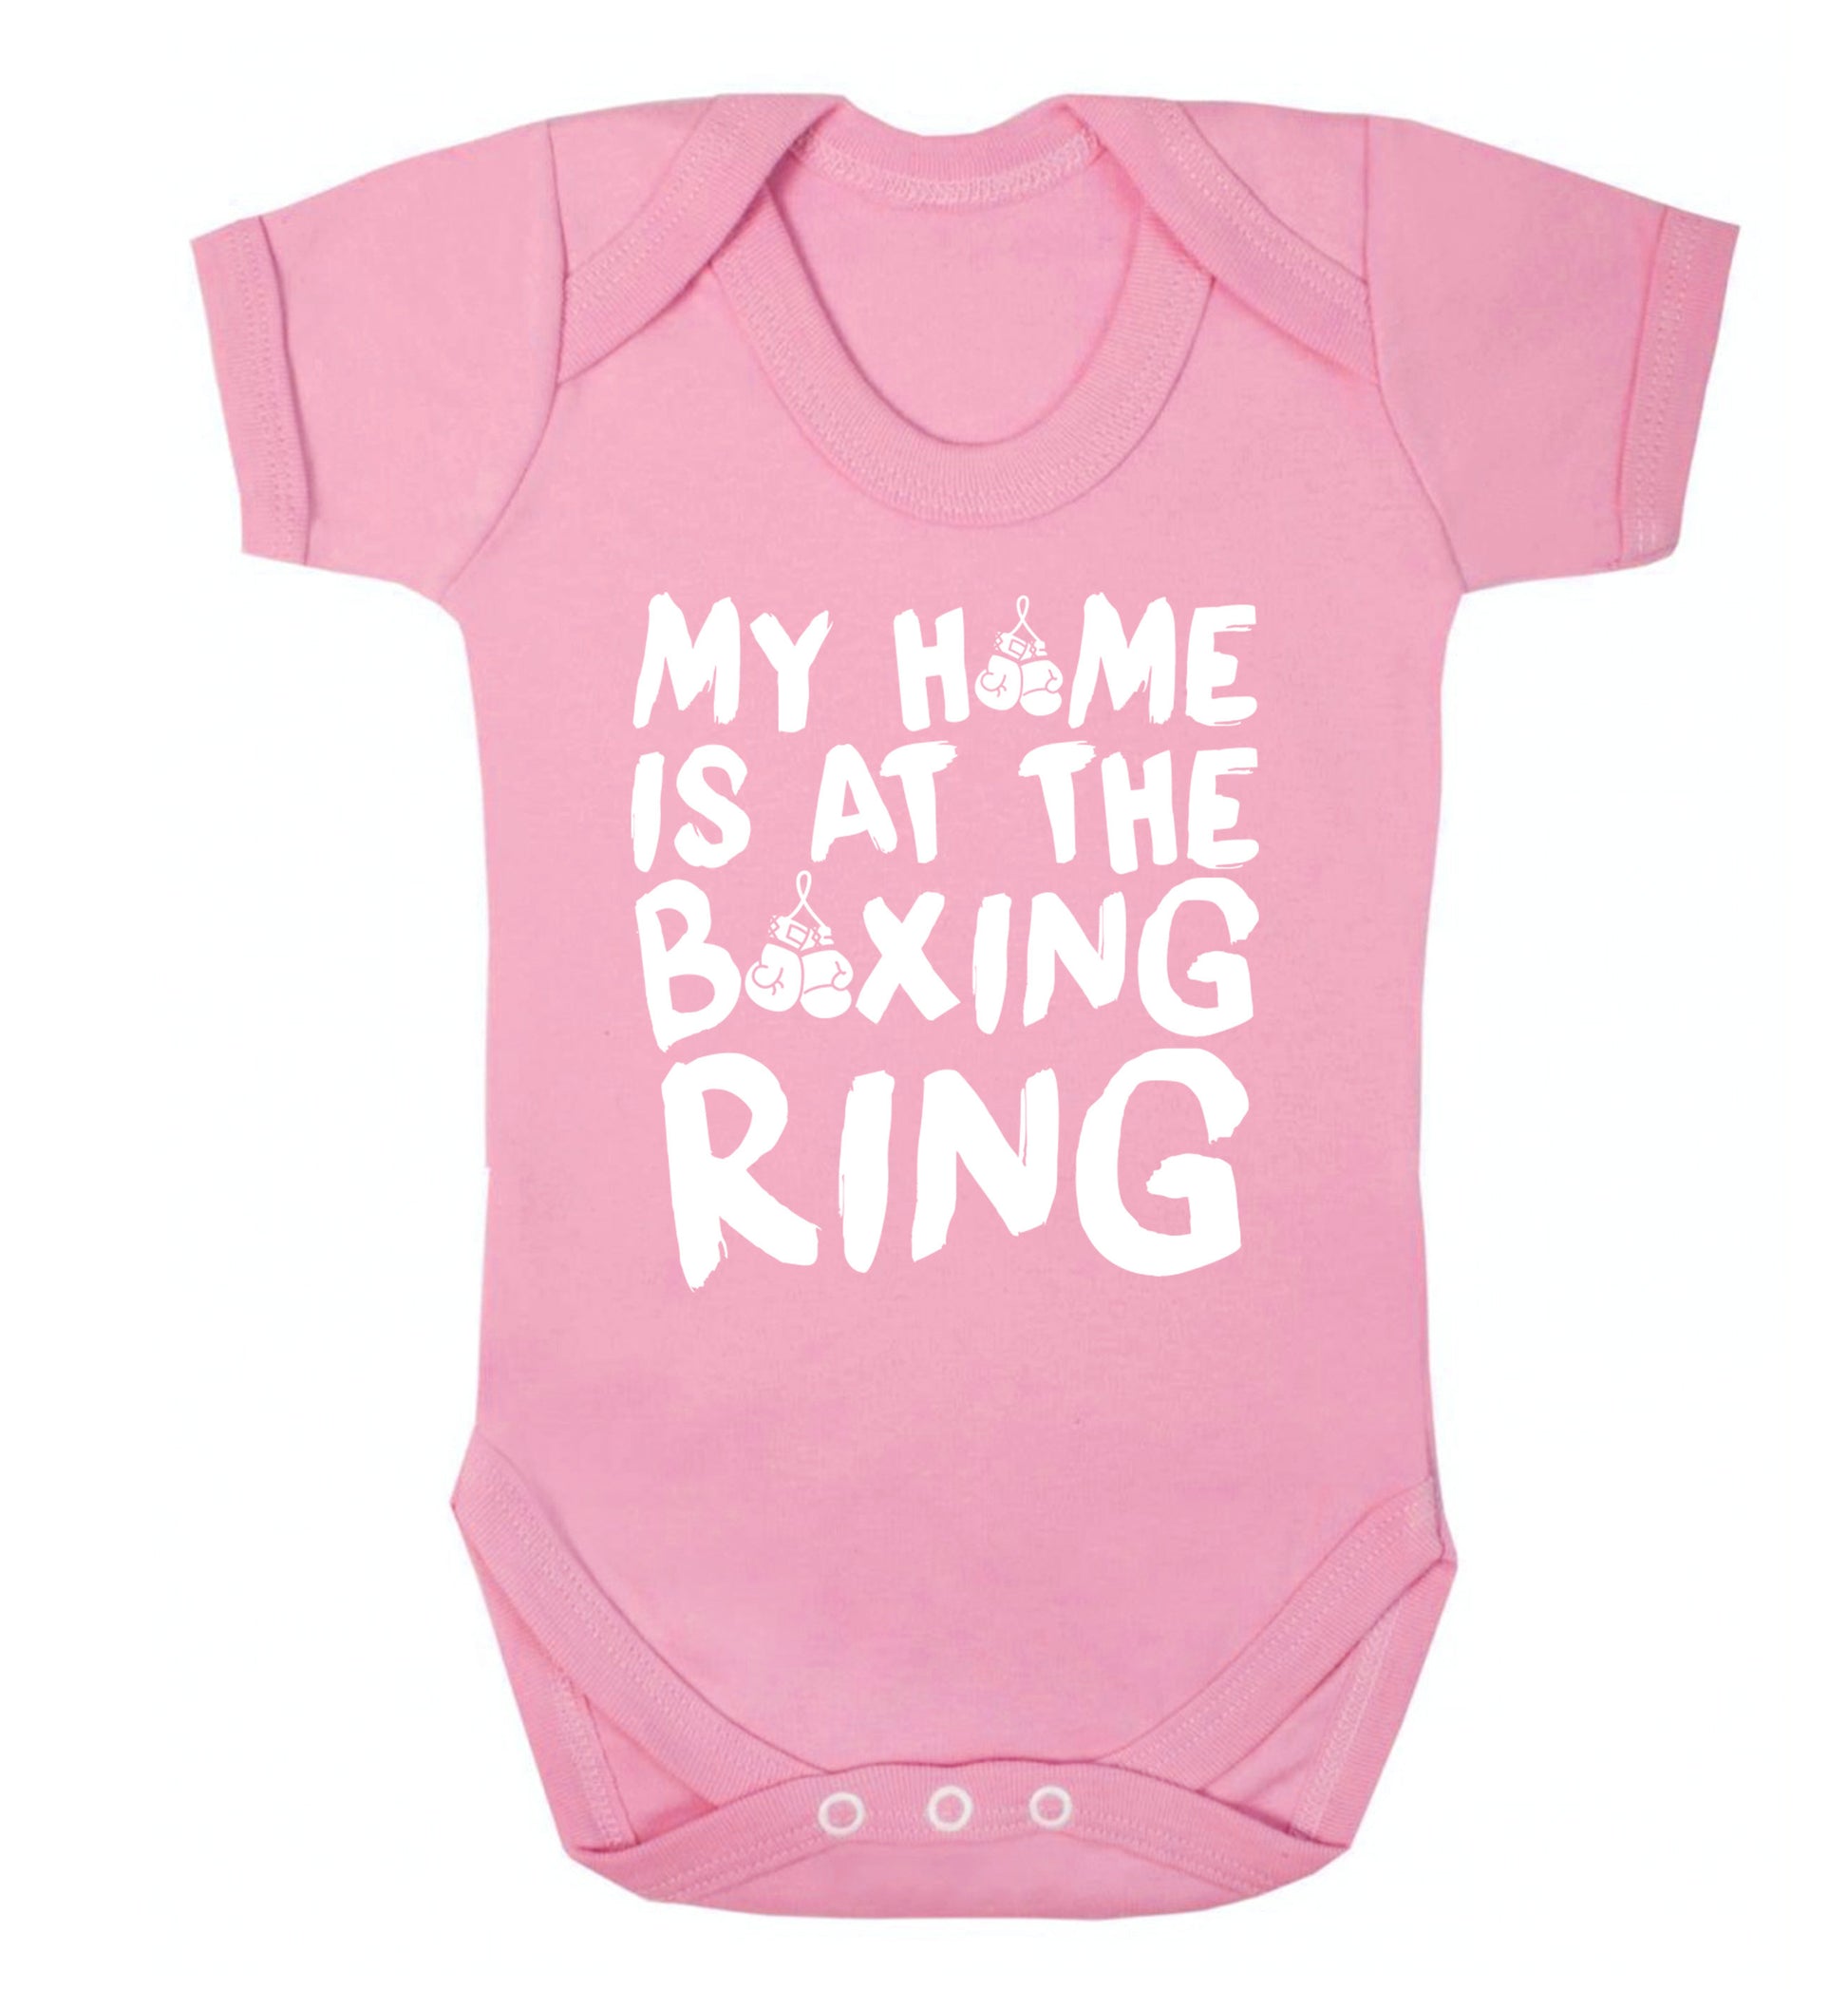 My home is at the boxing ring Baby Vest pale pink 18-24 months